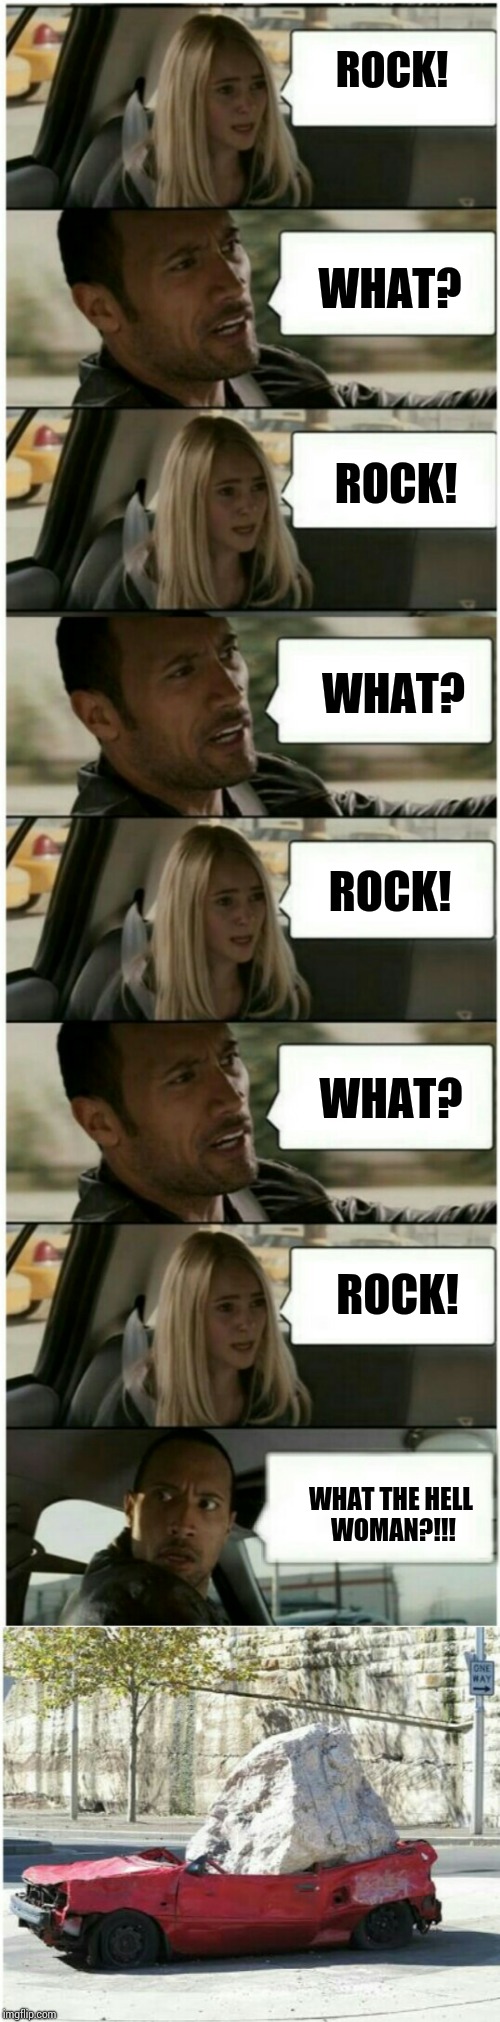 The Rock Driving | ROCK! WHAT? ROCK! WHAT? ROCK! WHAT? ROCK! WHAT THE HELL WOMAN?!!! | image tagged in meme,the rock driving | made w/ Imgflip meme maker